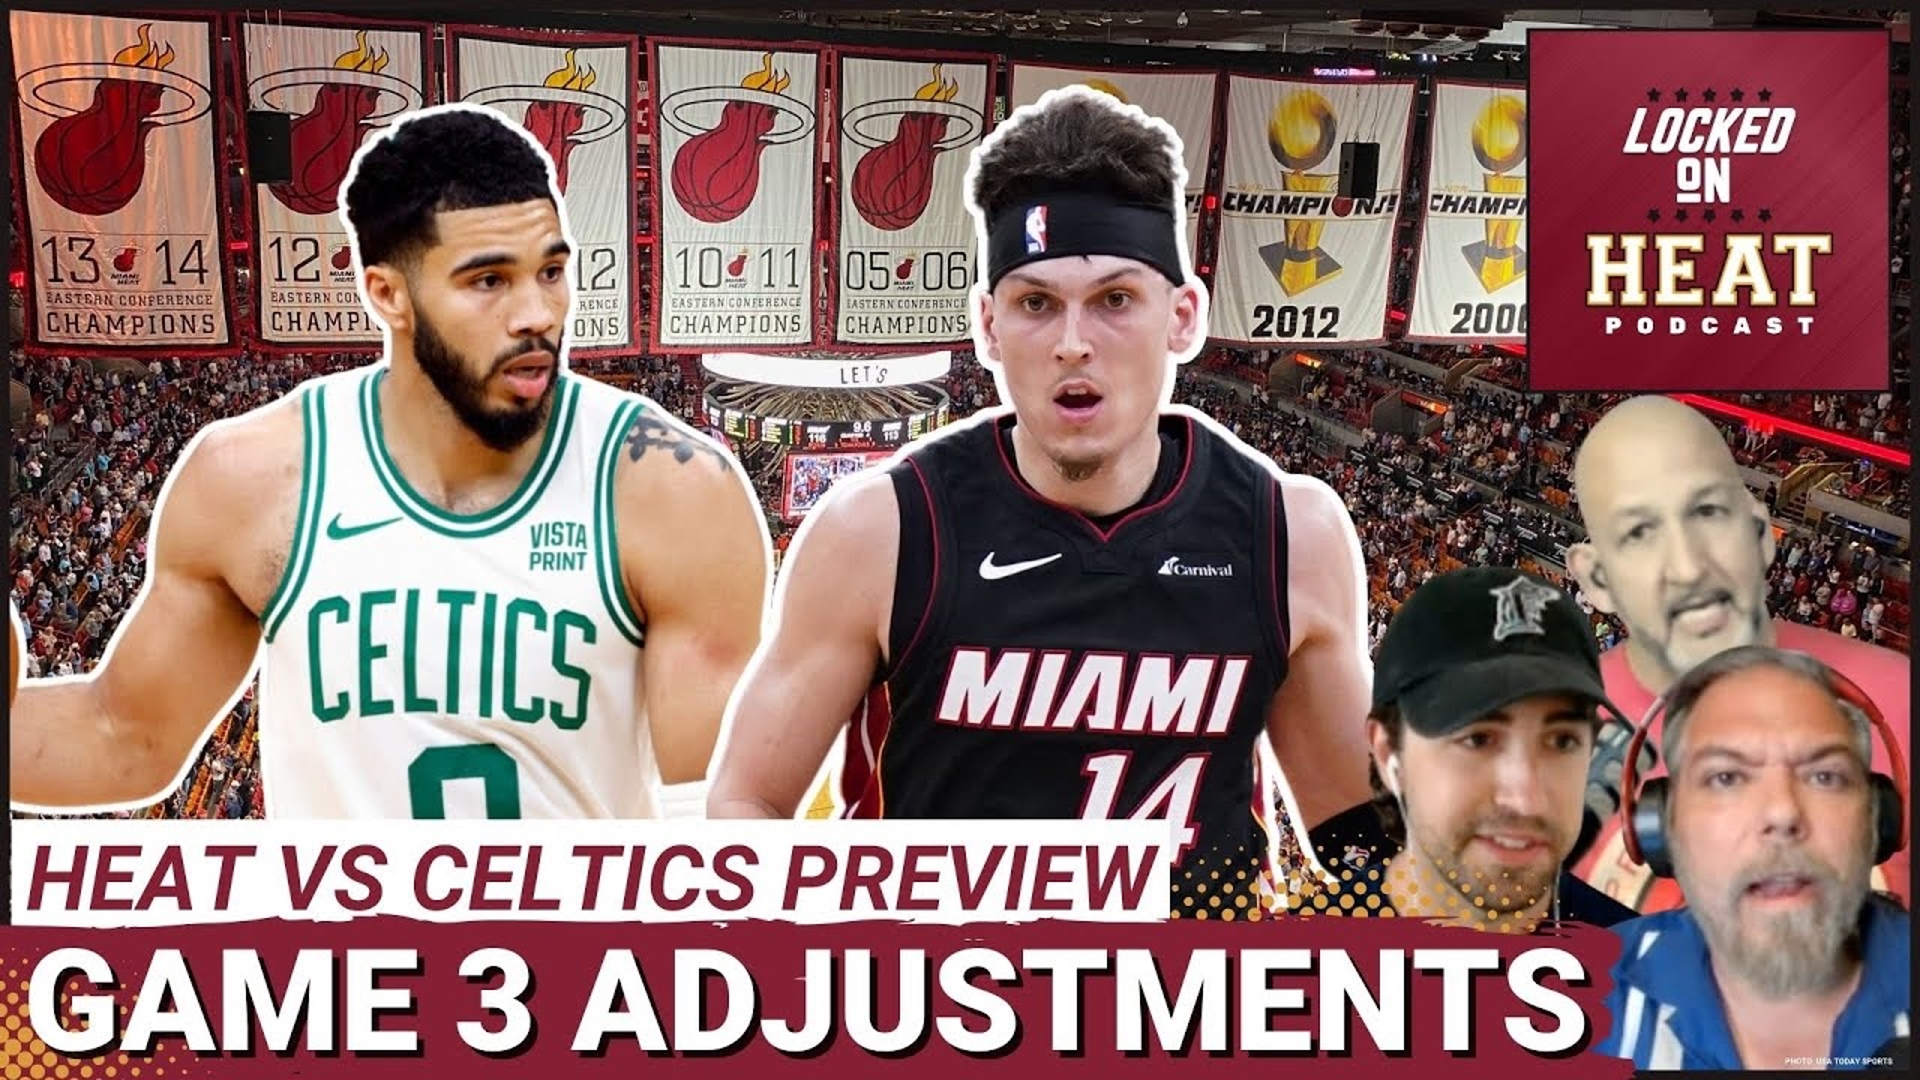 On this special crossover edition, the hosts of Locked On Heat and Locked On Celtics come together to preview Saturday's big Game 3 in Miami.